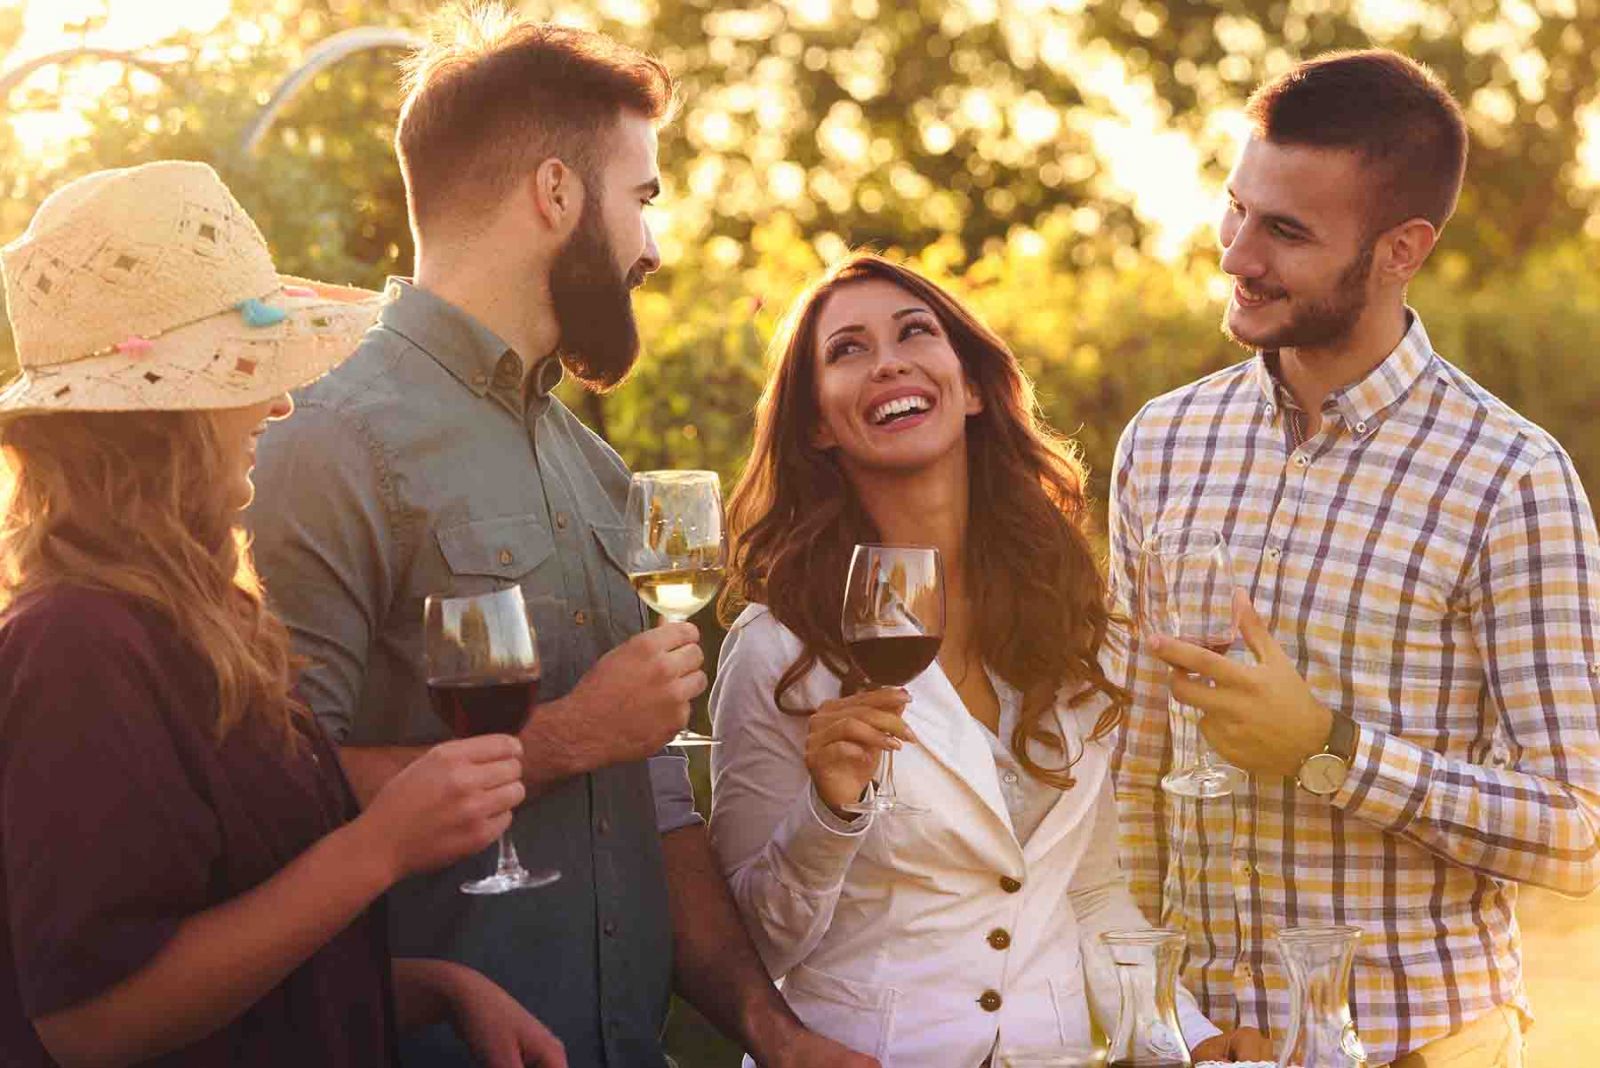 Friends enjoying wine together at a wine festival